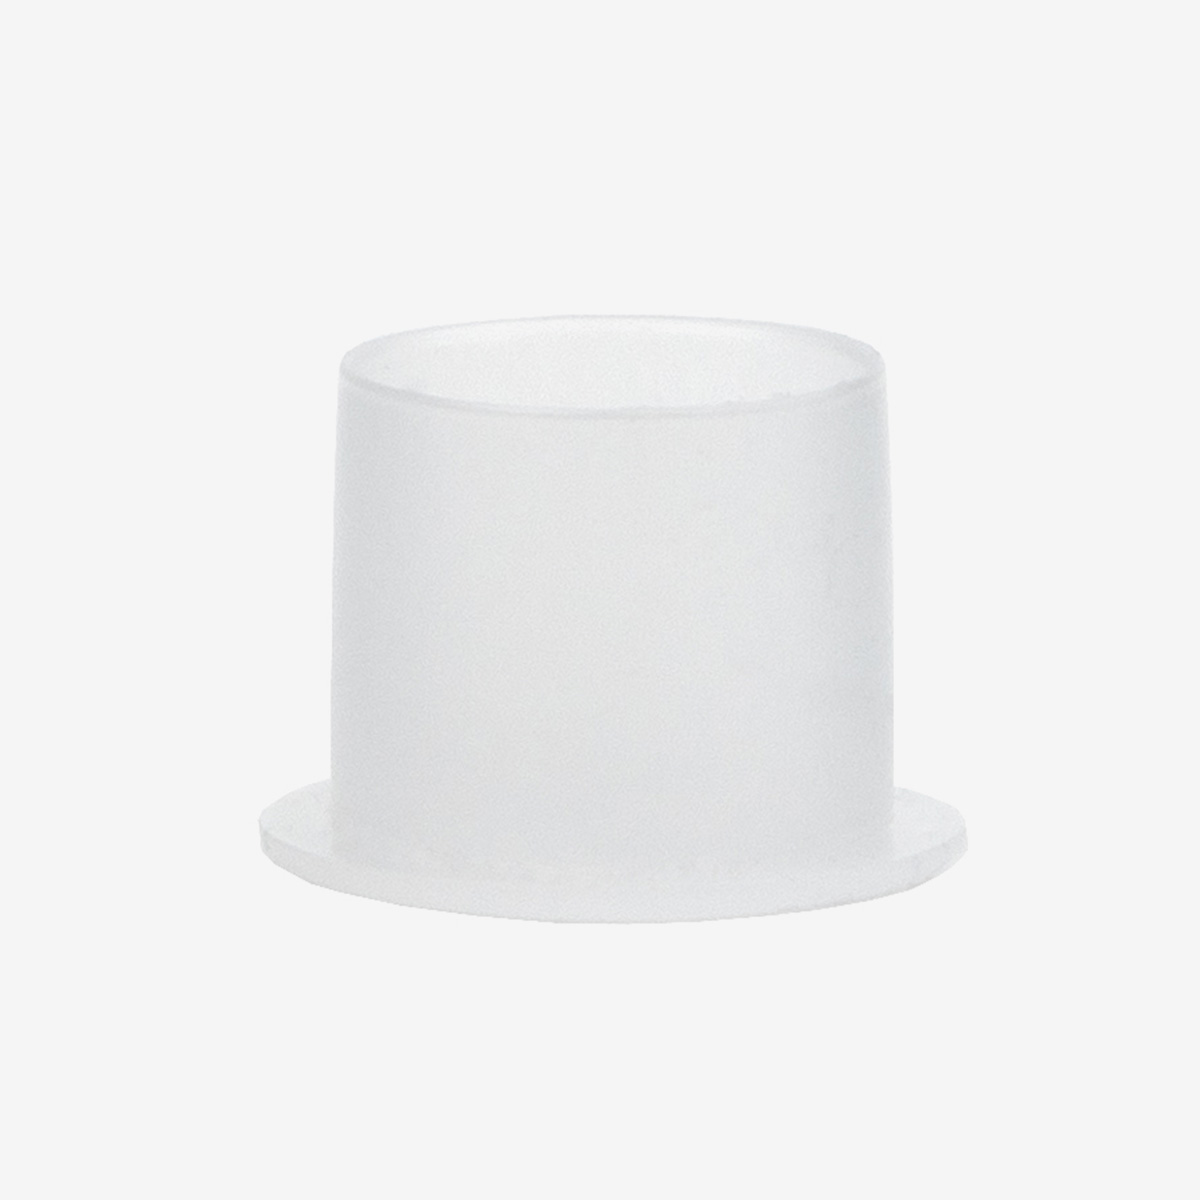 White air fitting cap on white background